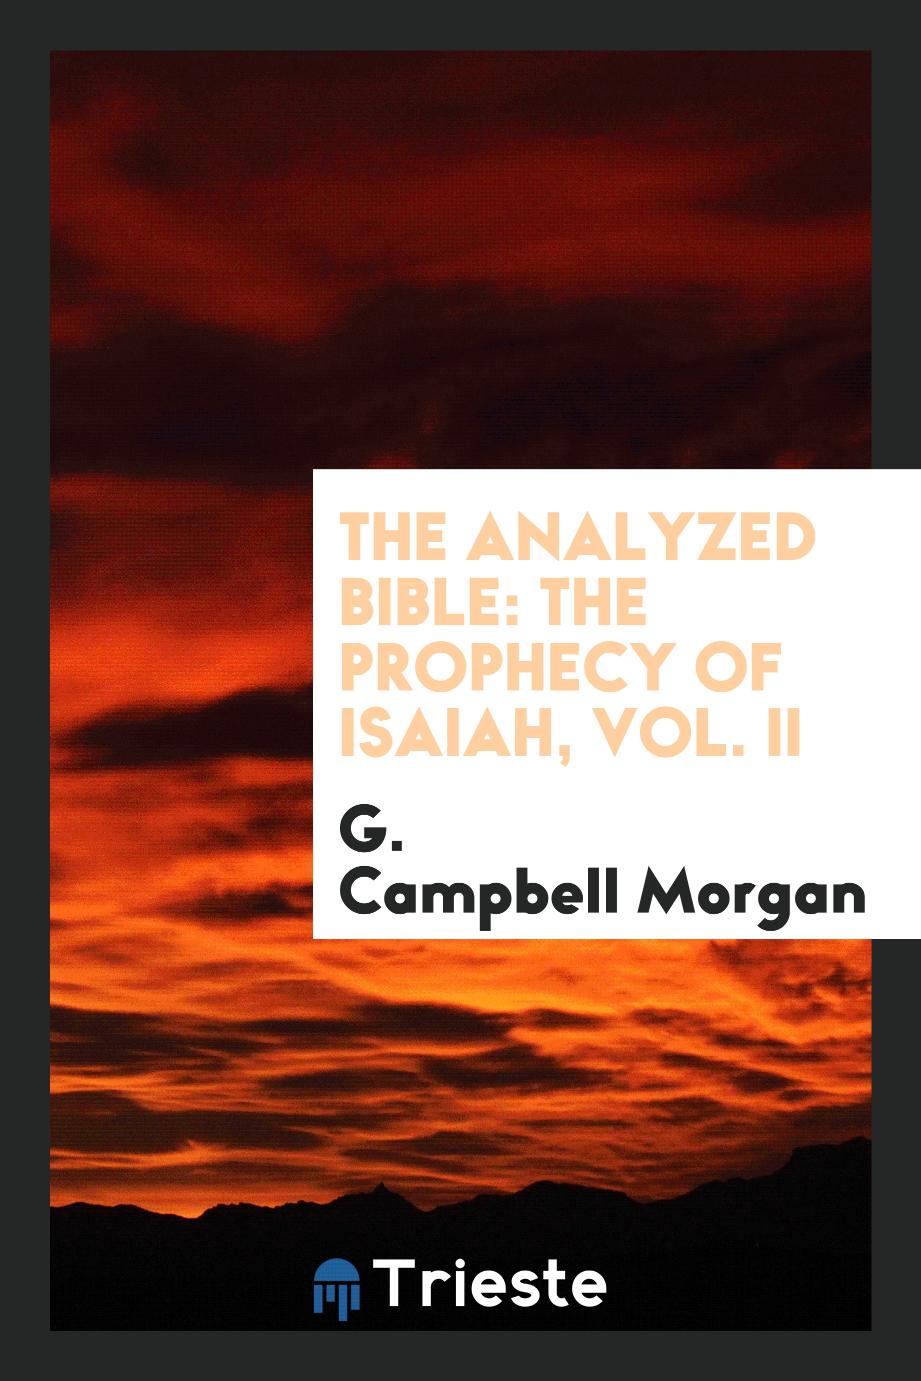 The Analyzed Bible: The Prophecy of Isaiah, Vol. II